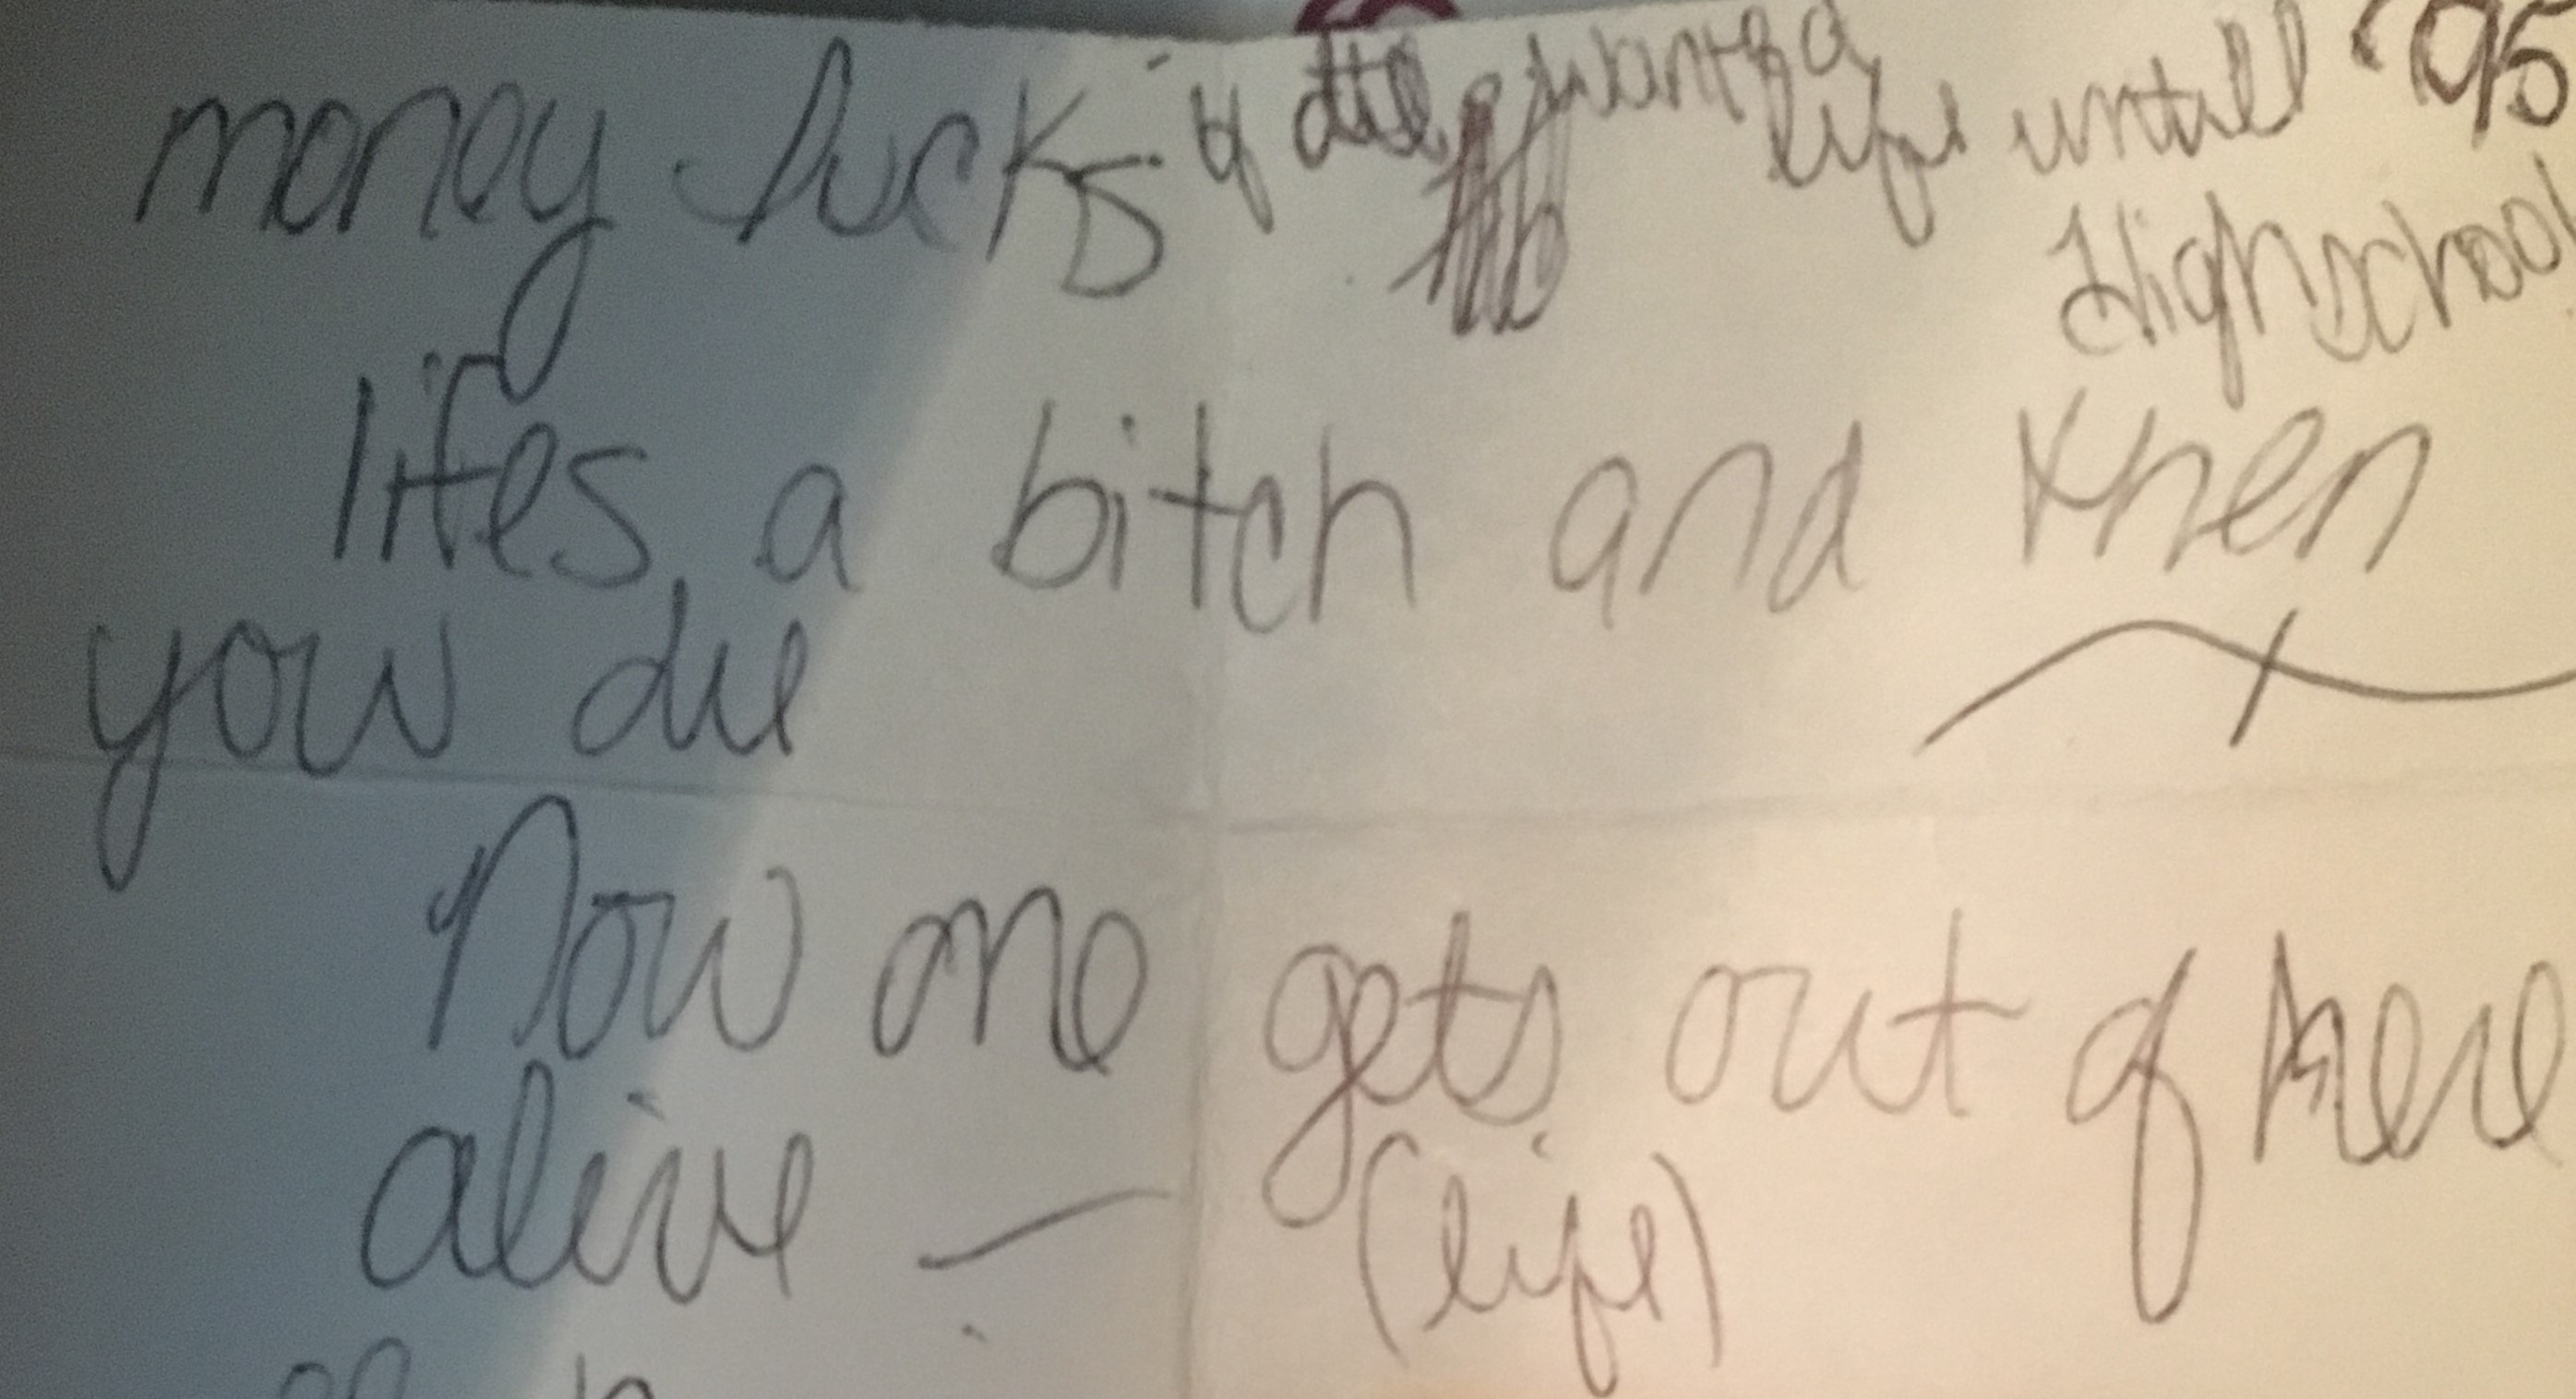 Notecard written by Houston writer Isobella Jade when she was a child